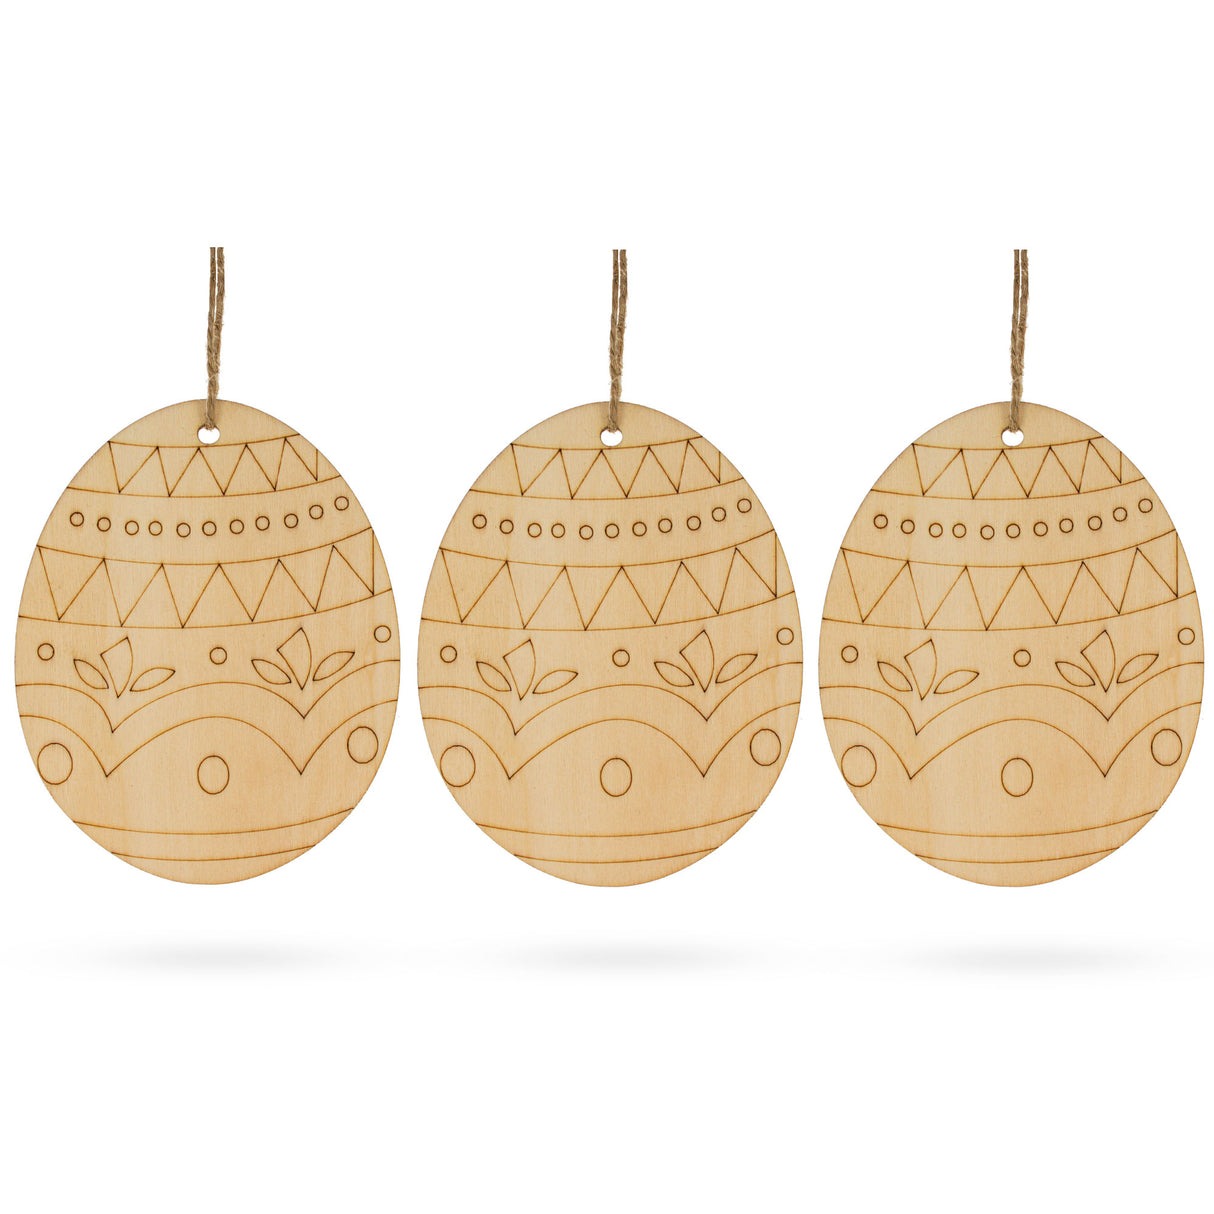 Set of 3 Easter Egg Unfinished Wooden Ornament 4.3 Inches in Blue color, Oval shape